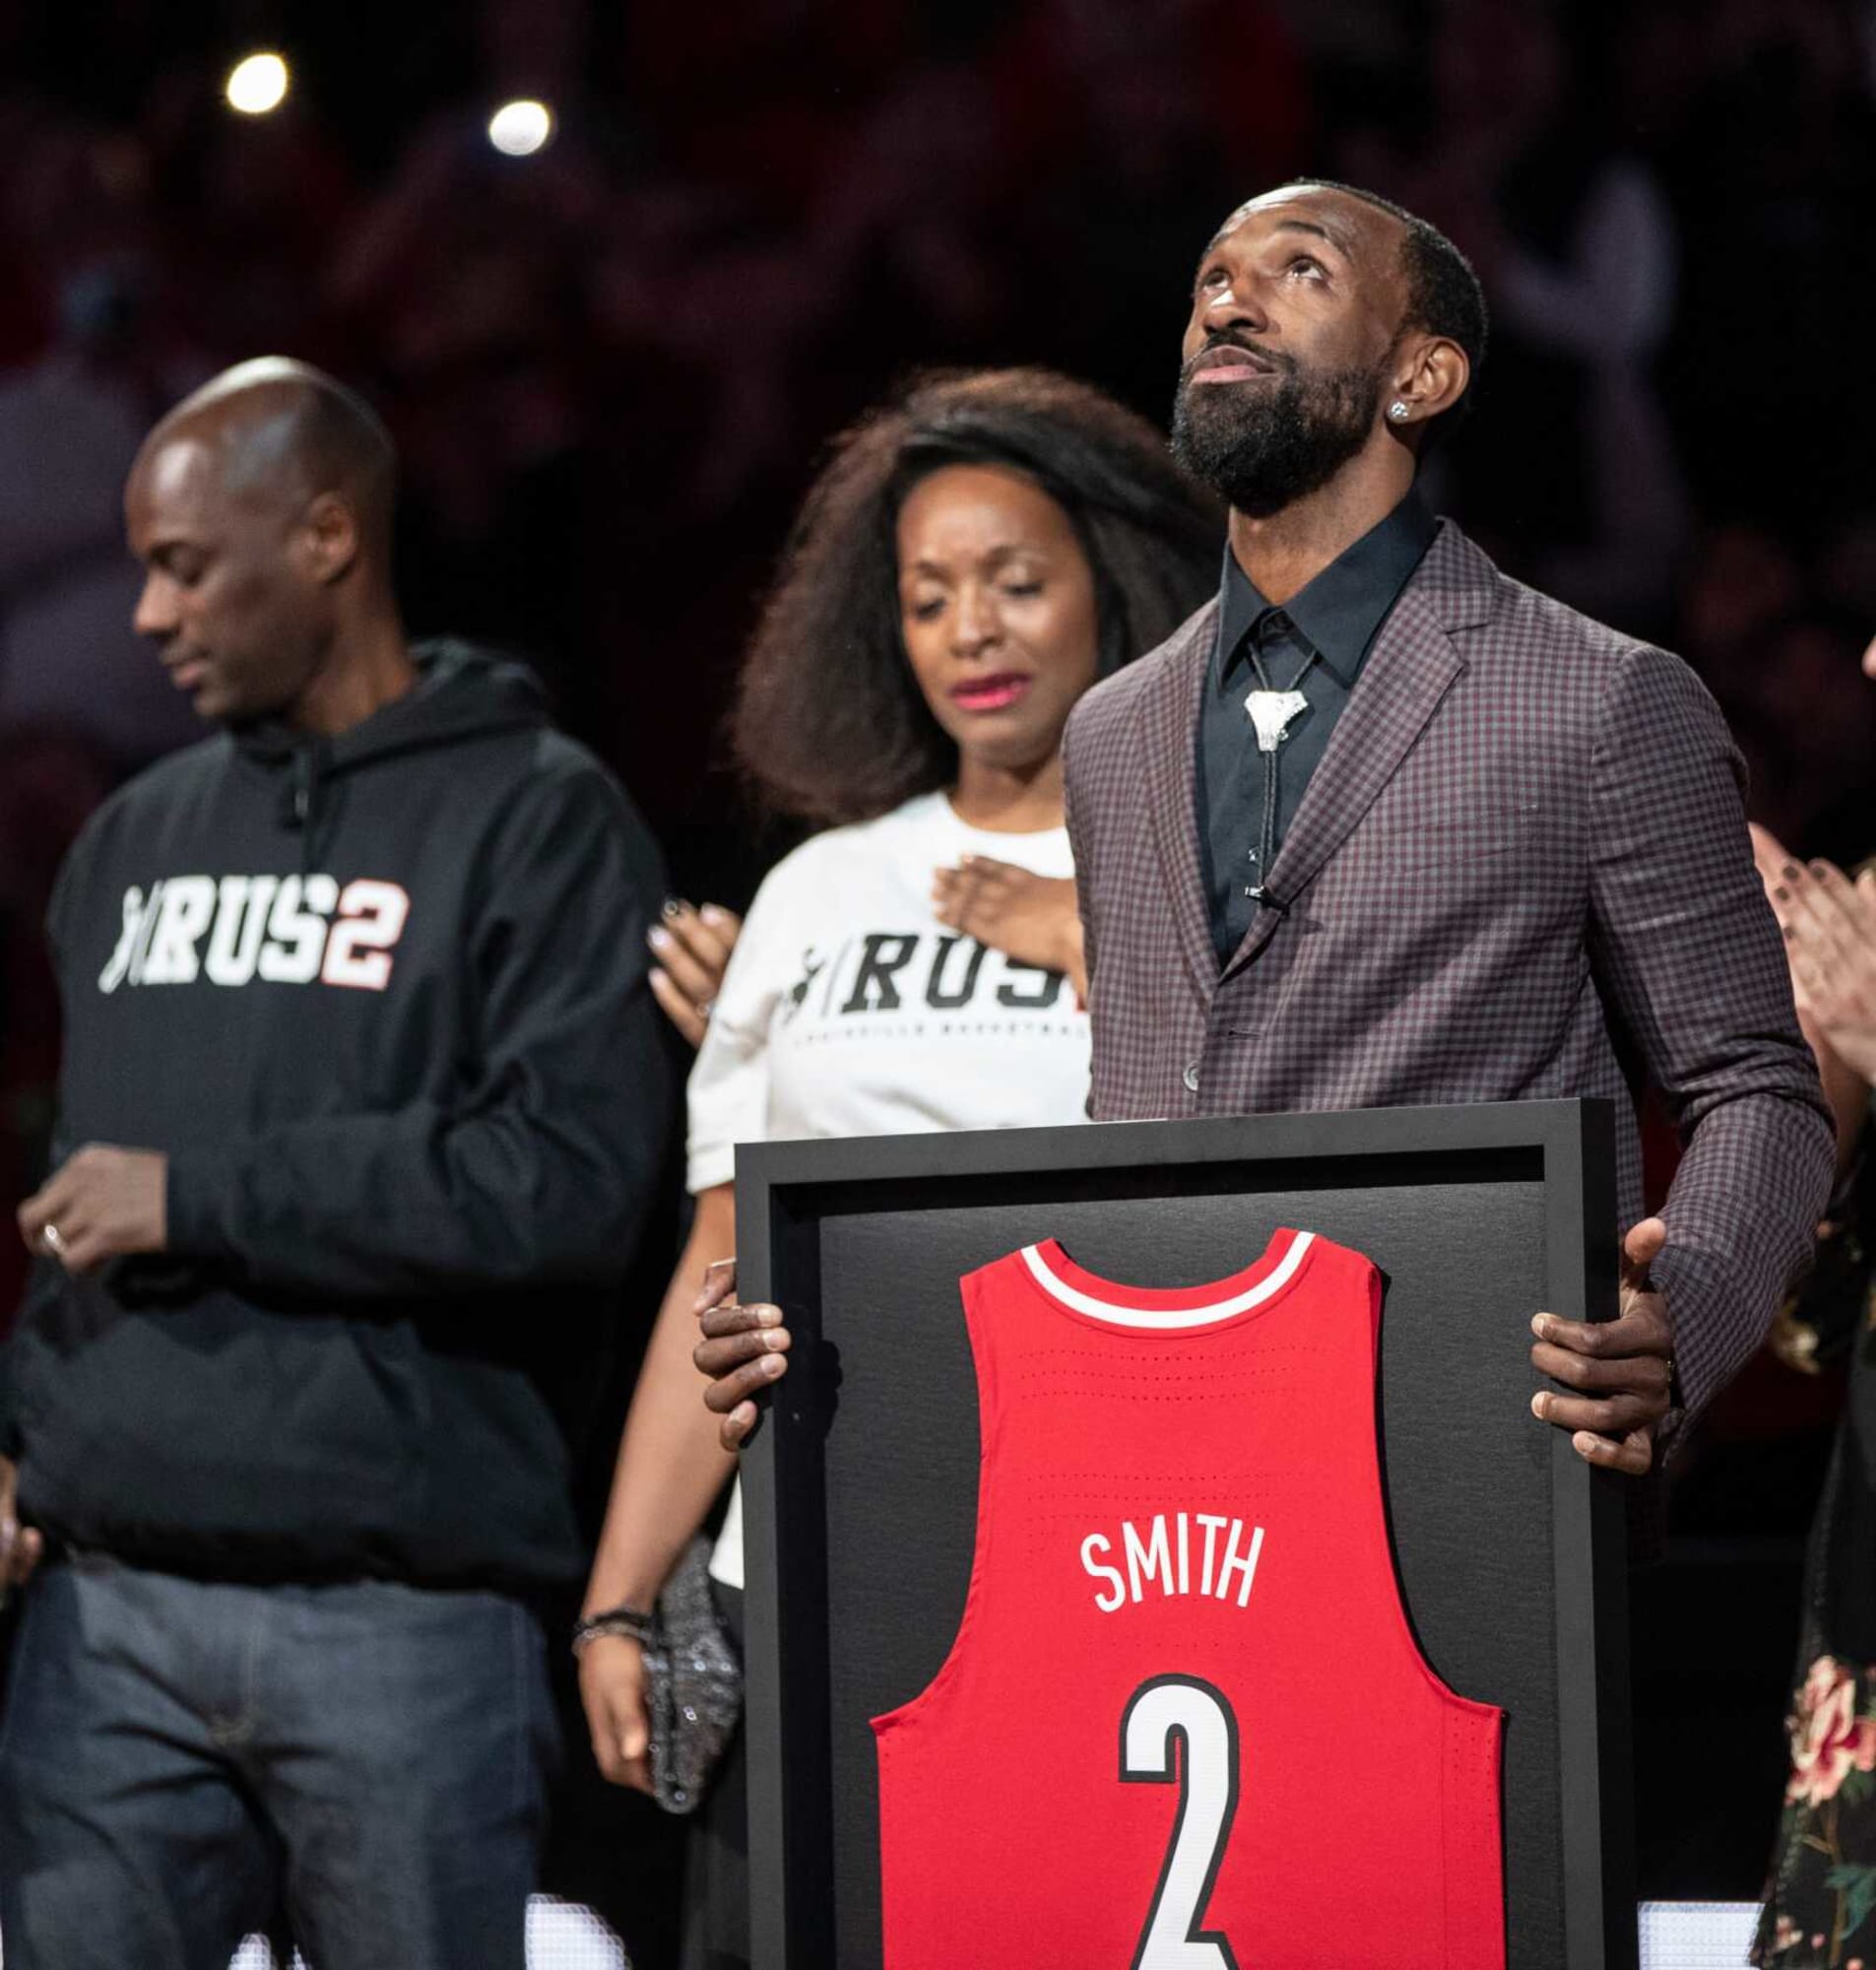 Louisville Basketball: Remembering Russ “Russdiculous” Smith